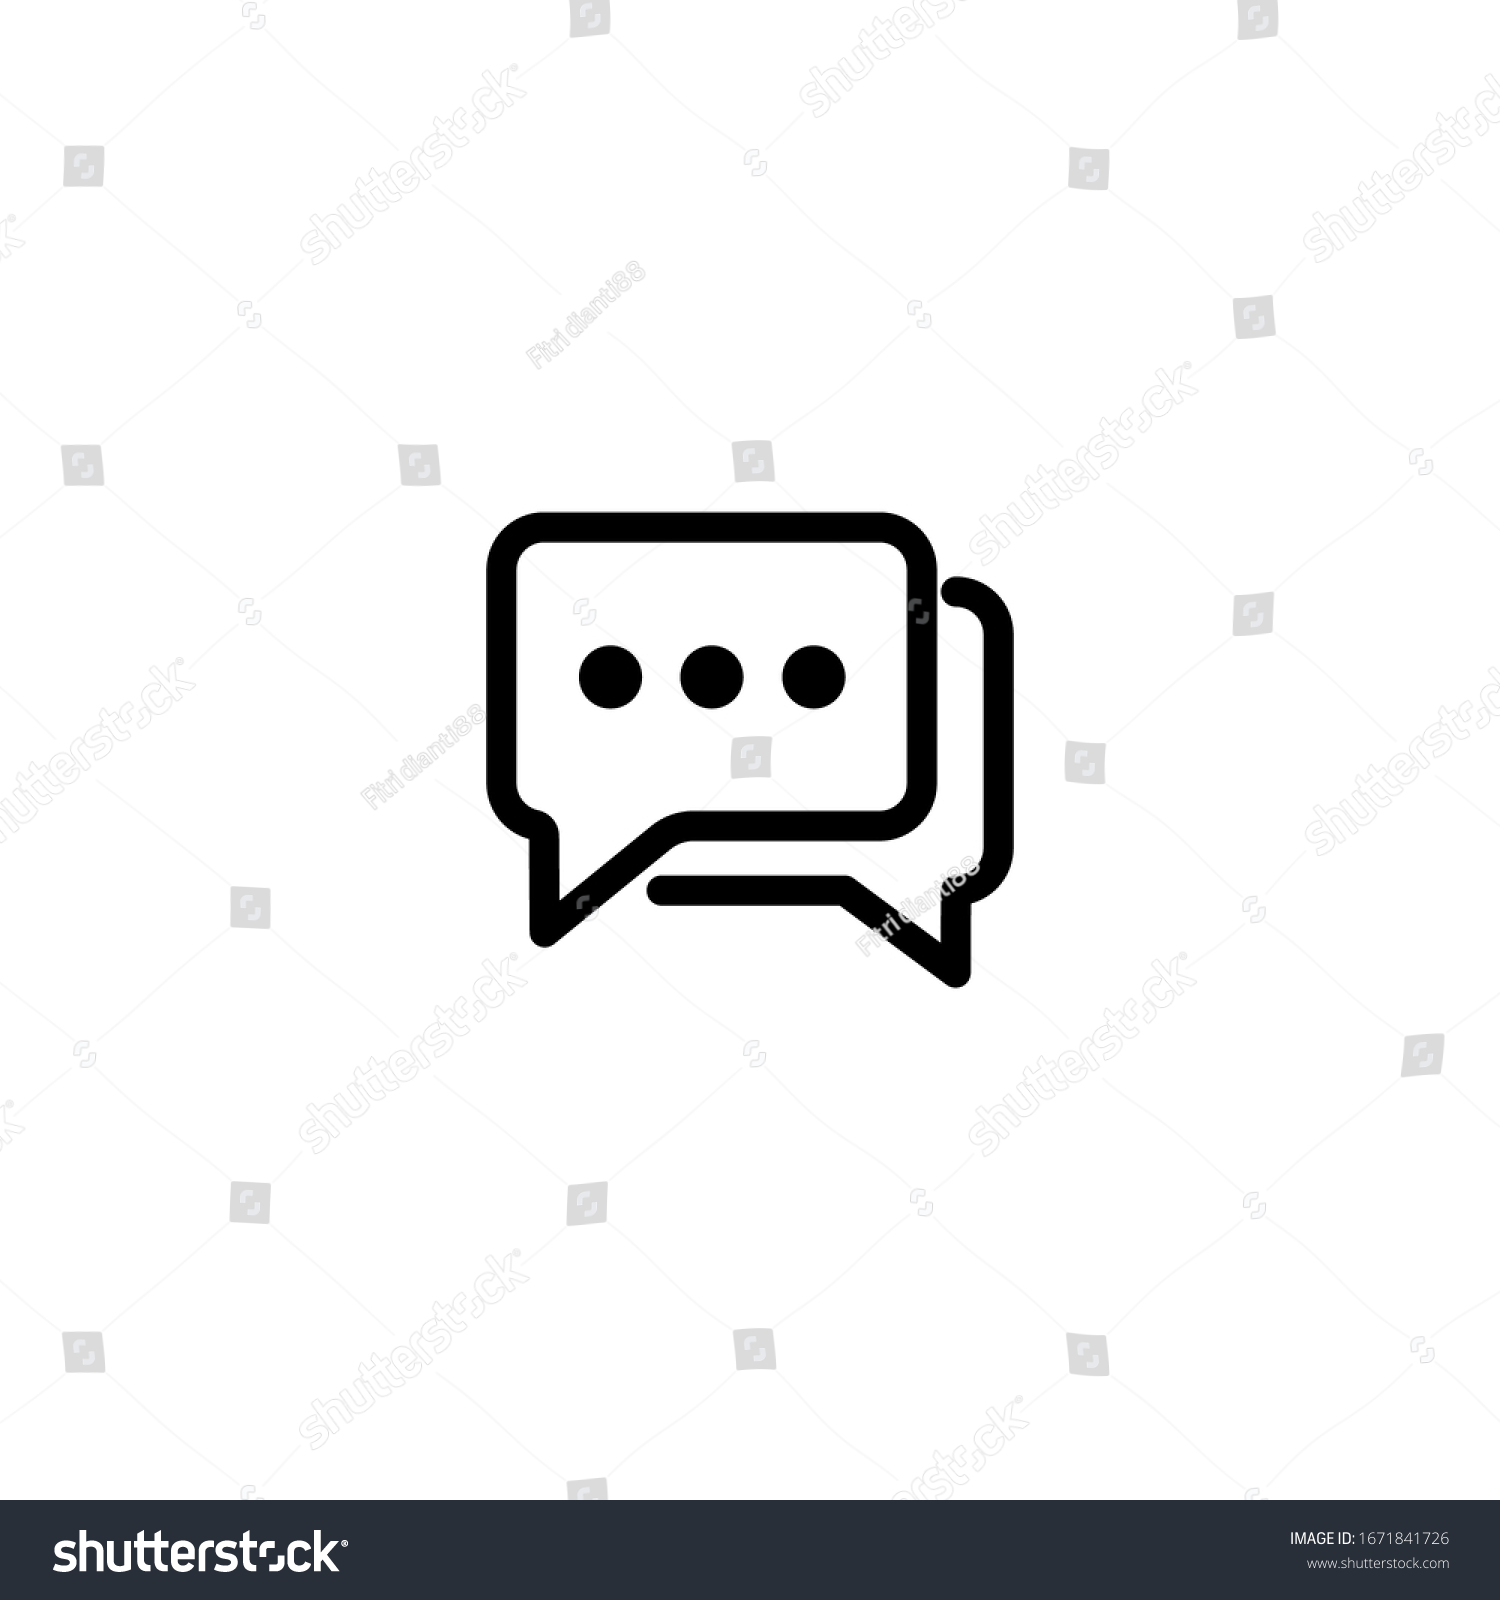 Chat Message Icon Design Vector #1671841726